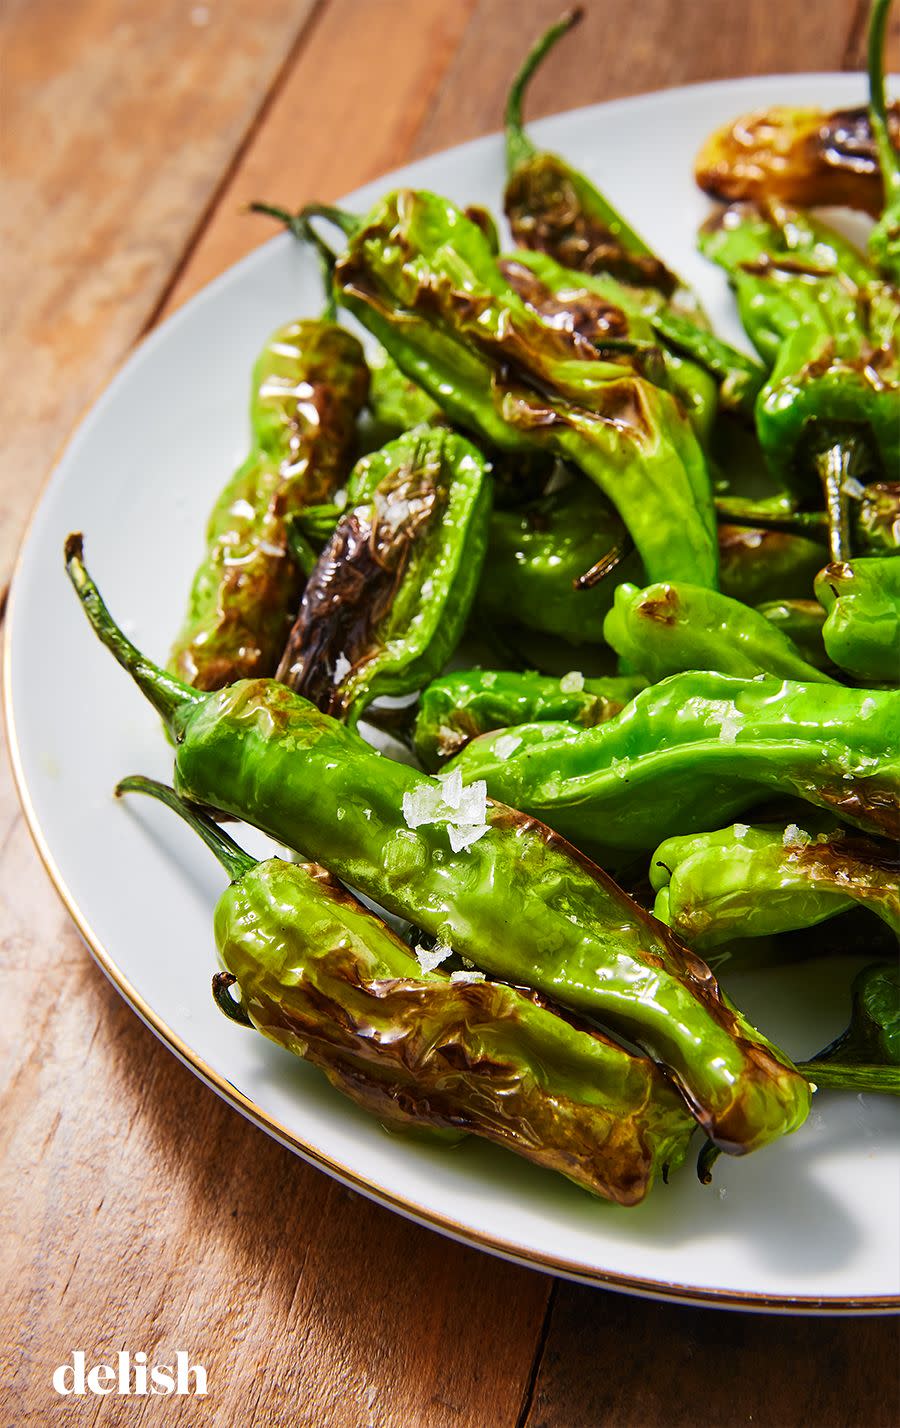 <p>Blistered shishito peppers make for the perfect flavorful, <a href="https://www.delish.com/cooking/nutrition/g600/healthy-snacks-for-work/" rel="nofollow noopener" target="_blank" data-ylk="slk:healthy snack" class="link ">healthy snack</a>. They aren't very spicy (only 1 in 10 gets anywhere near the heat of, say, a jalapeño), which means you can mindlessly eat them without burning your face off. Yum!</p><p>Get the <strong><a href="https://www.delish.com/cooking/recipe-ideas/a26988541/shishito-peppers-recipe/" rel="nofollow noopener" target="_blank" data-ylk="slk:Shishito Peppers recipe" class="link ">Shishito Peppers recipe</a></strong>.</p>